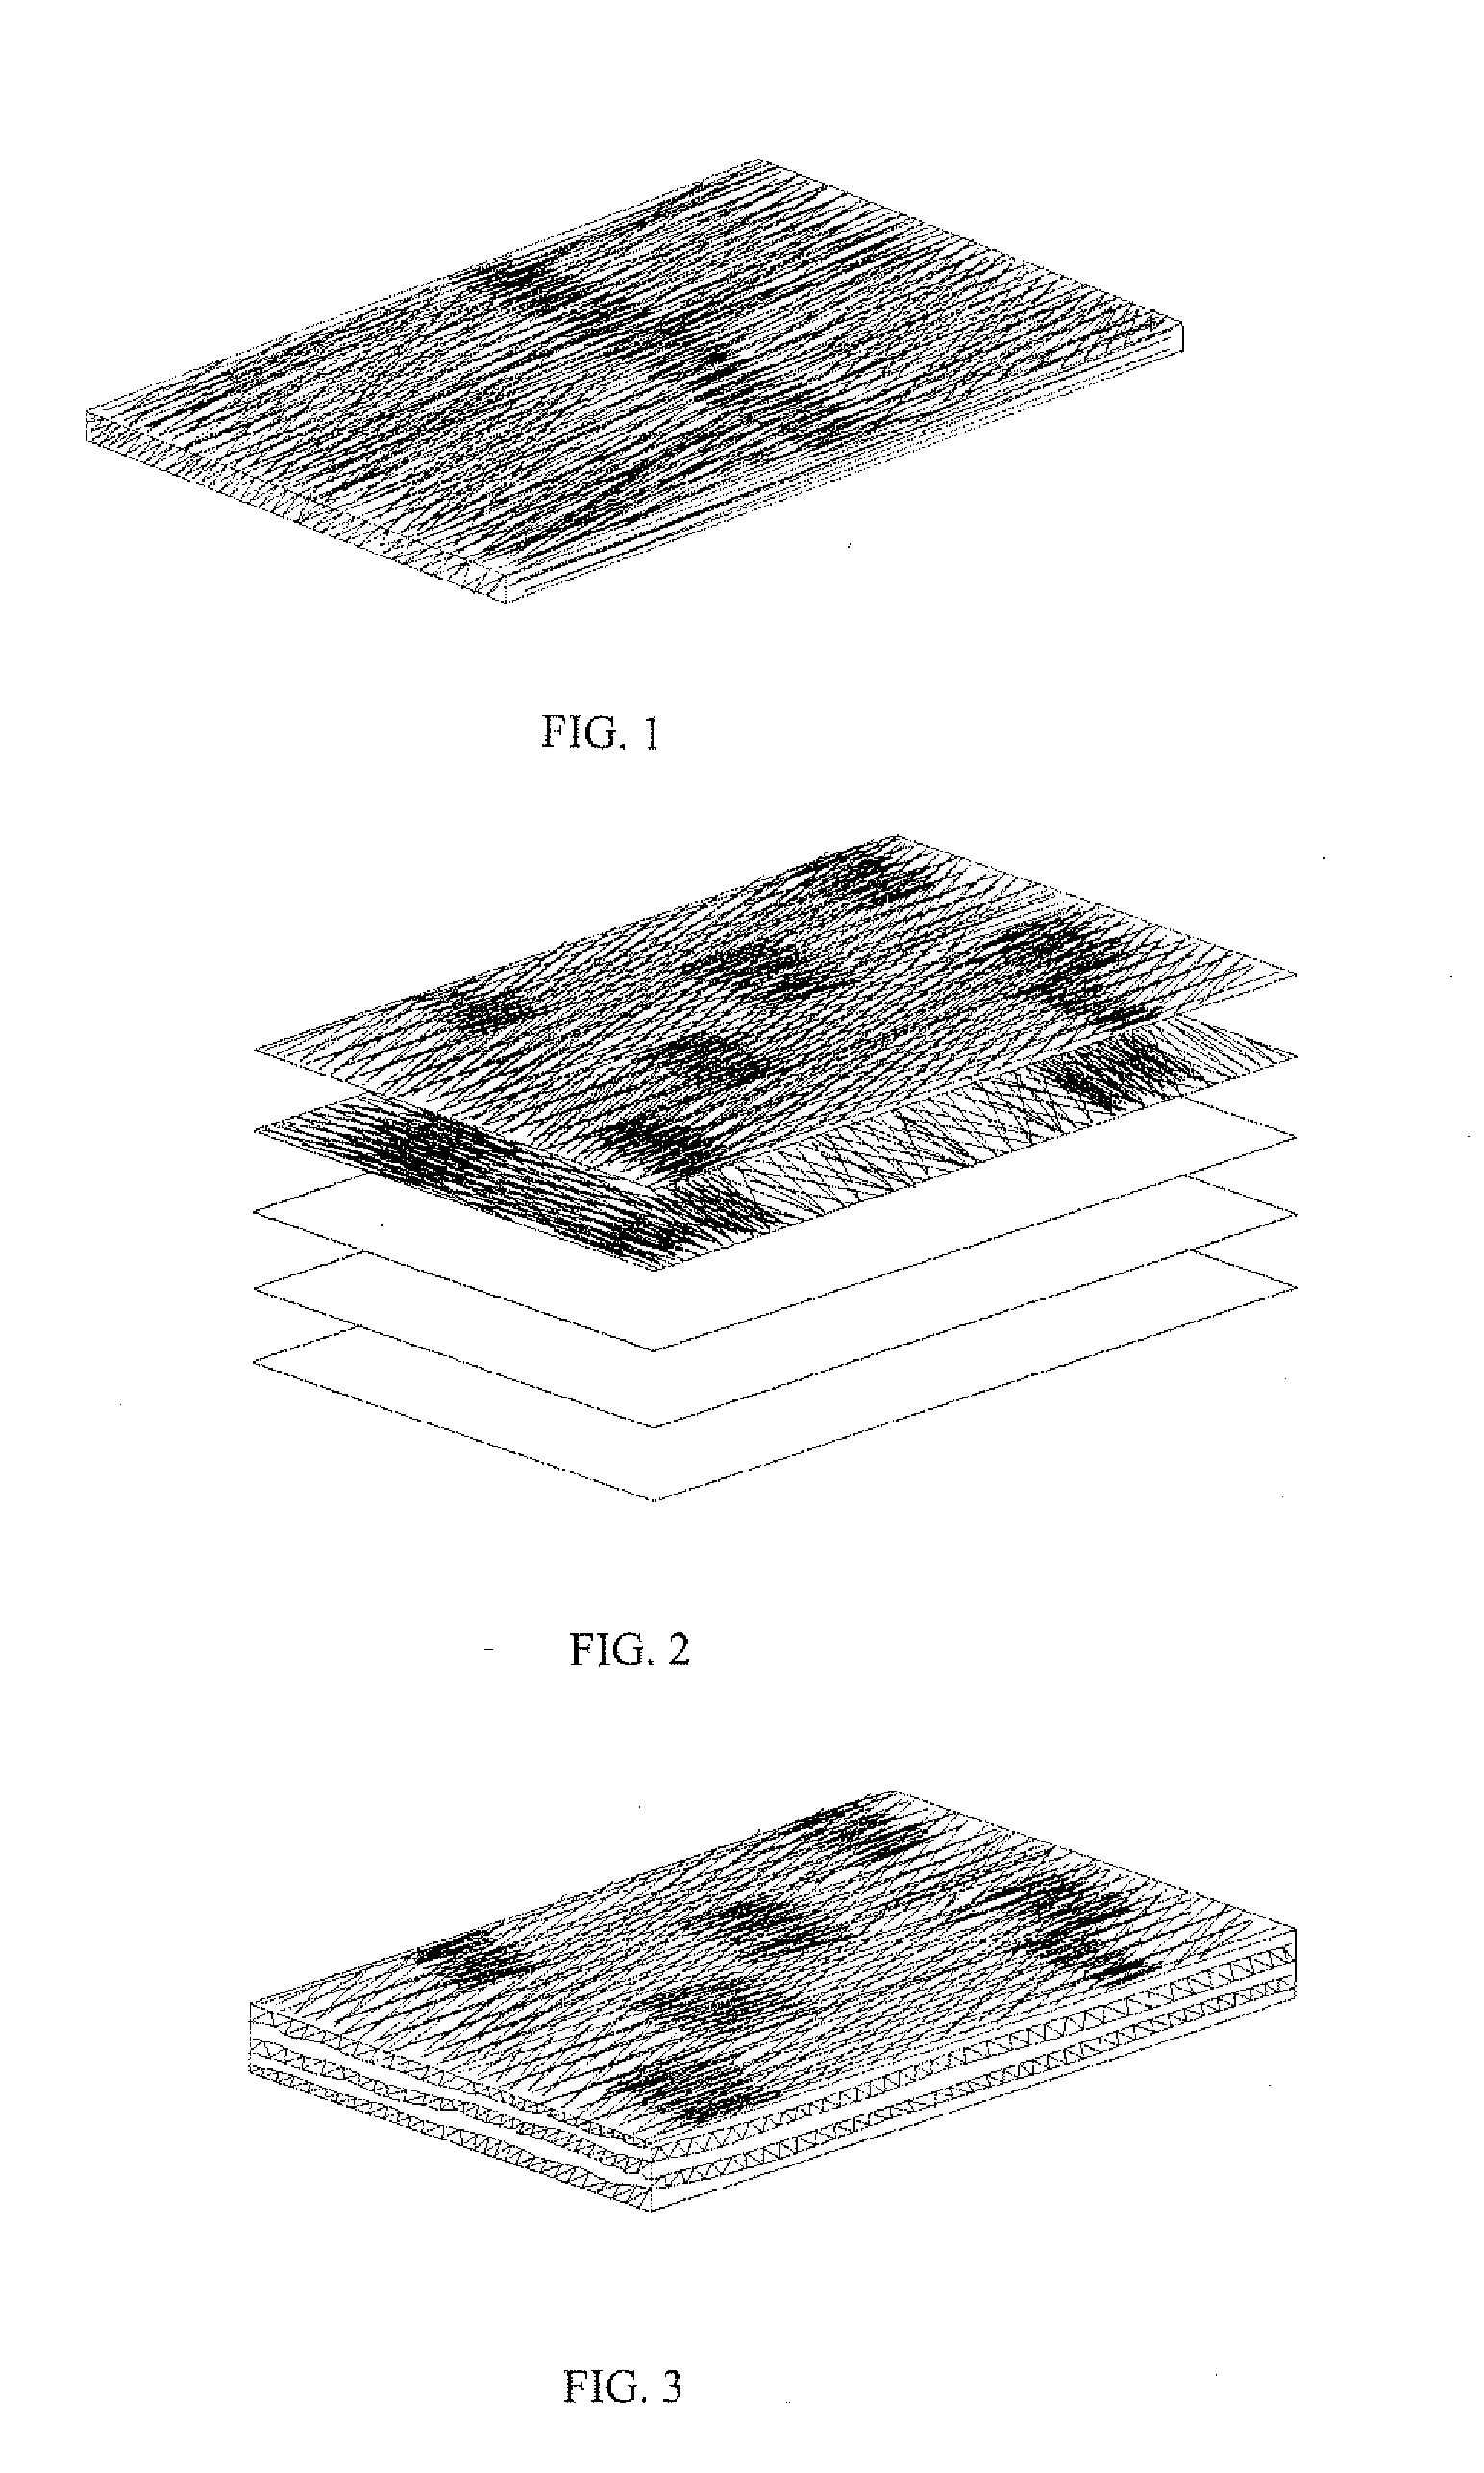 Bamboo artificial board and producing method thereof